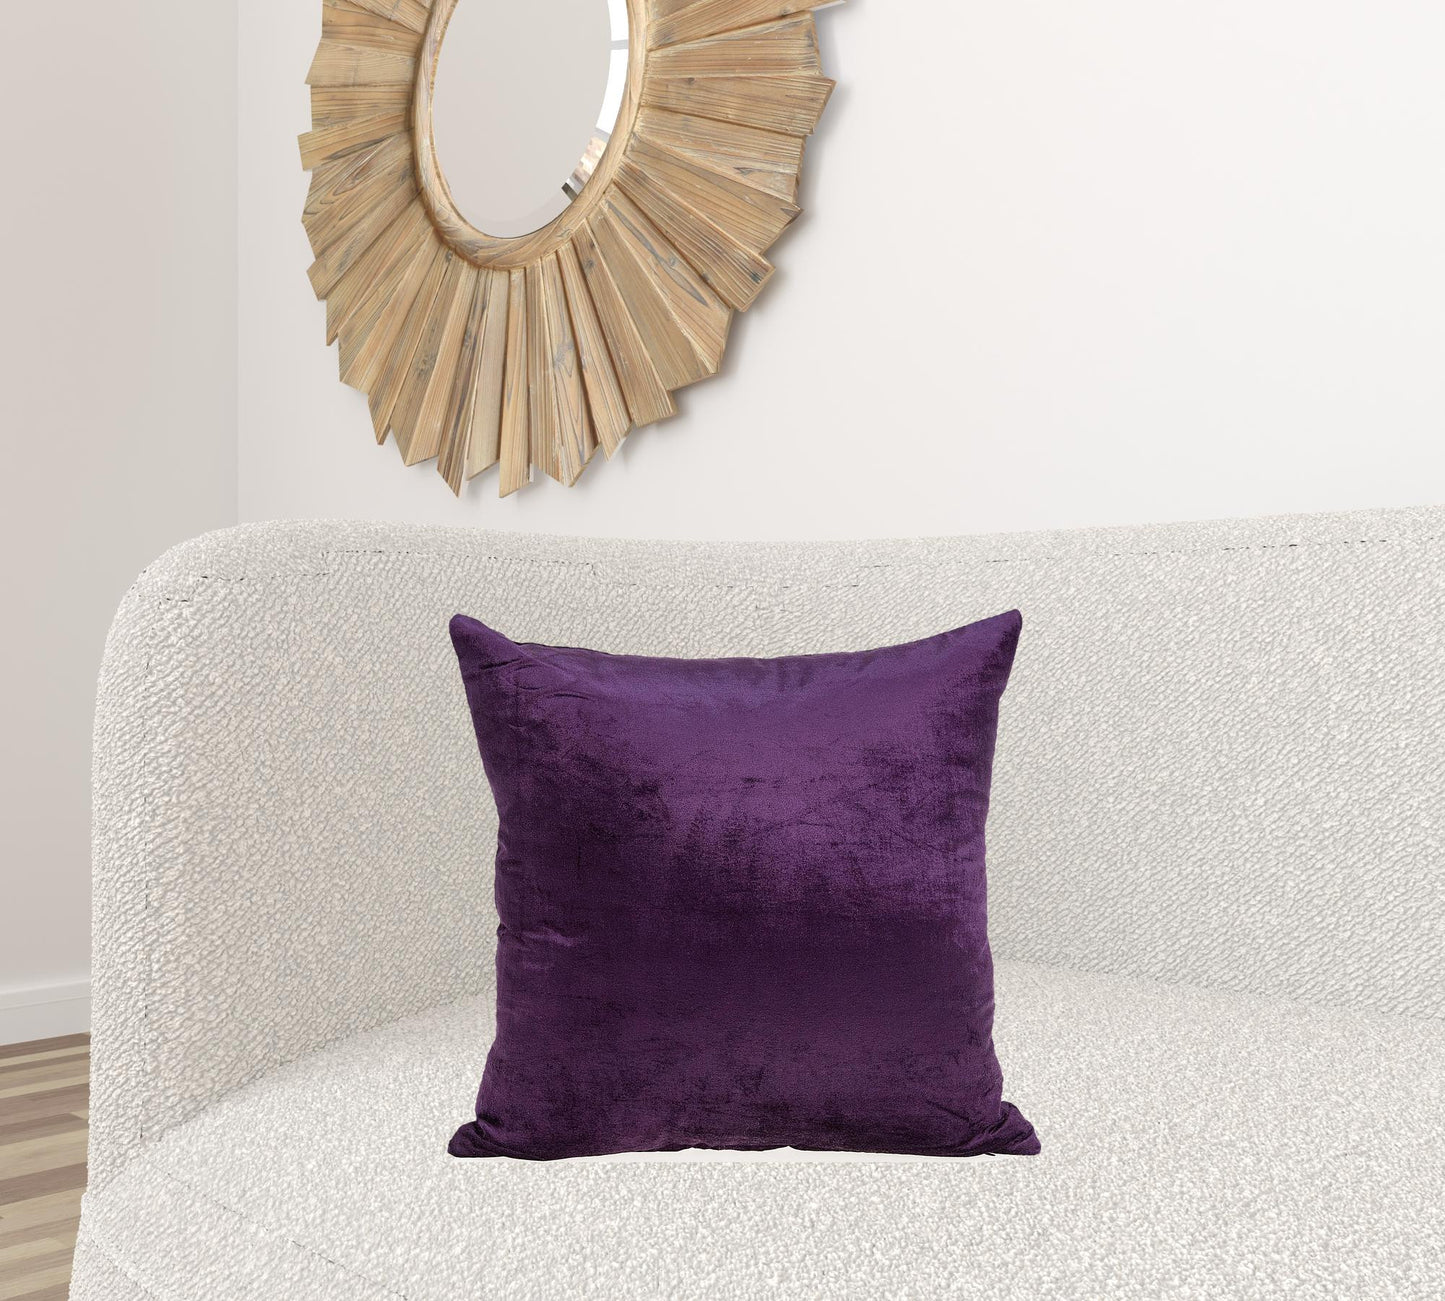 20" X 7" X 20" Transitional Purple Solid Pillow Cover With Poly Insert